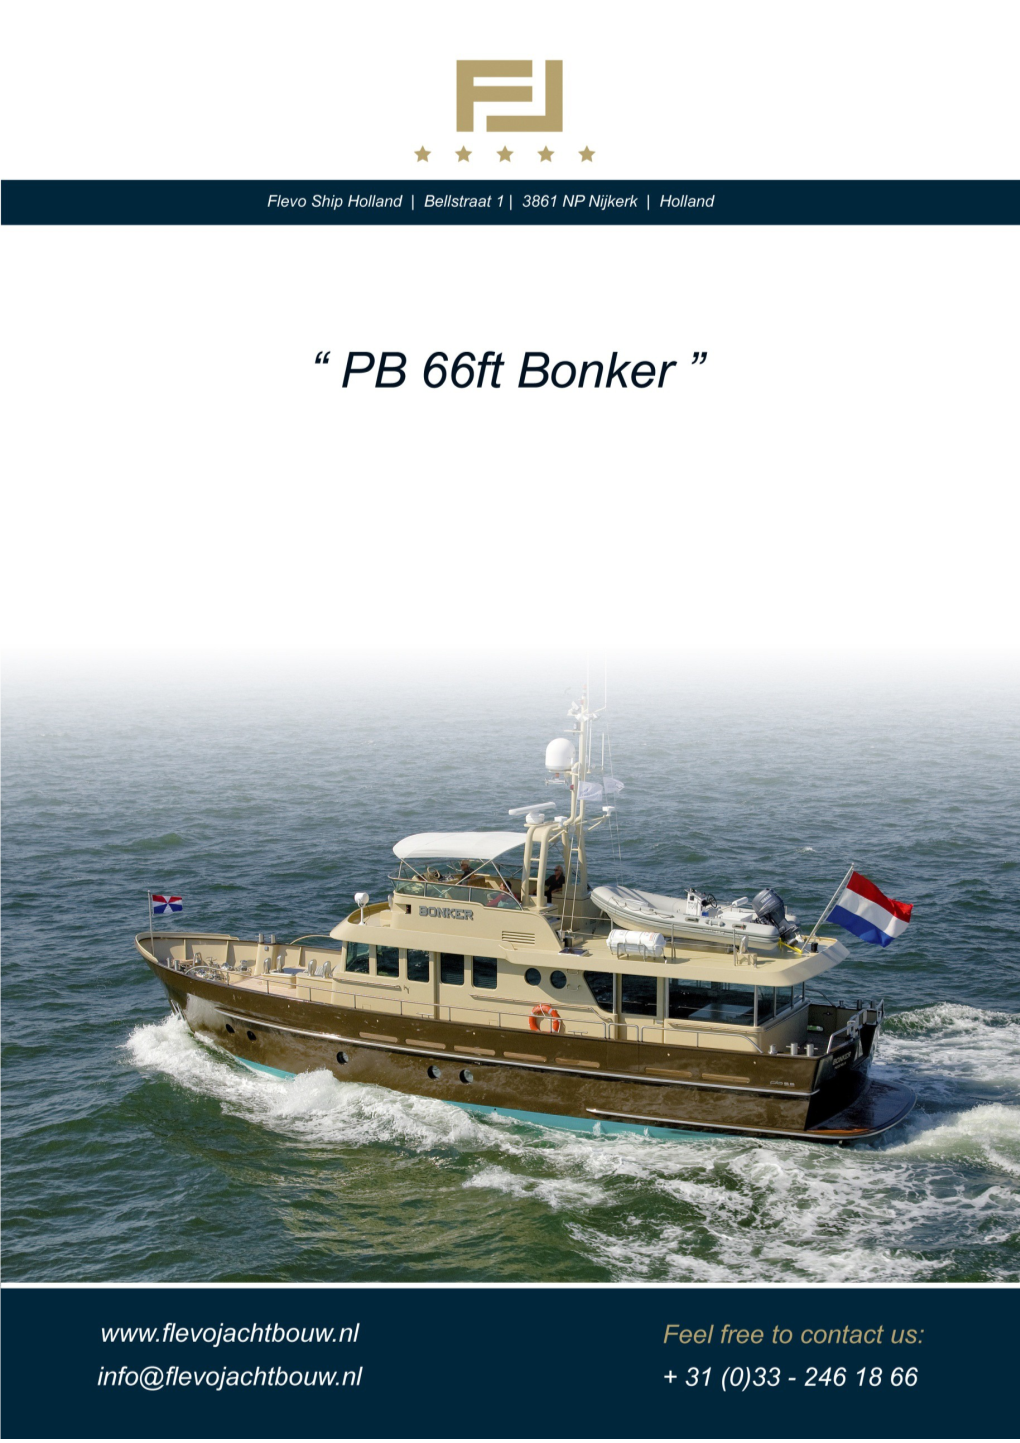 The Bonker (PB-66) Is a Robust, Seaworthy Round Bilge Yacht, Designed for All Weather